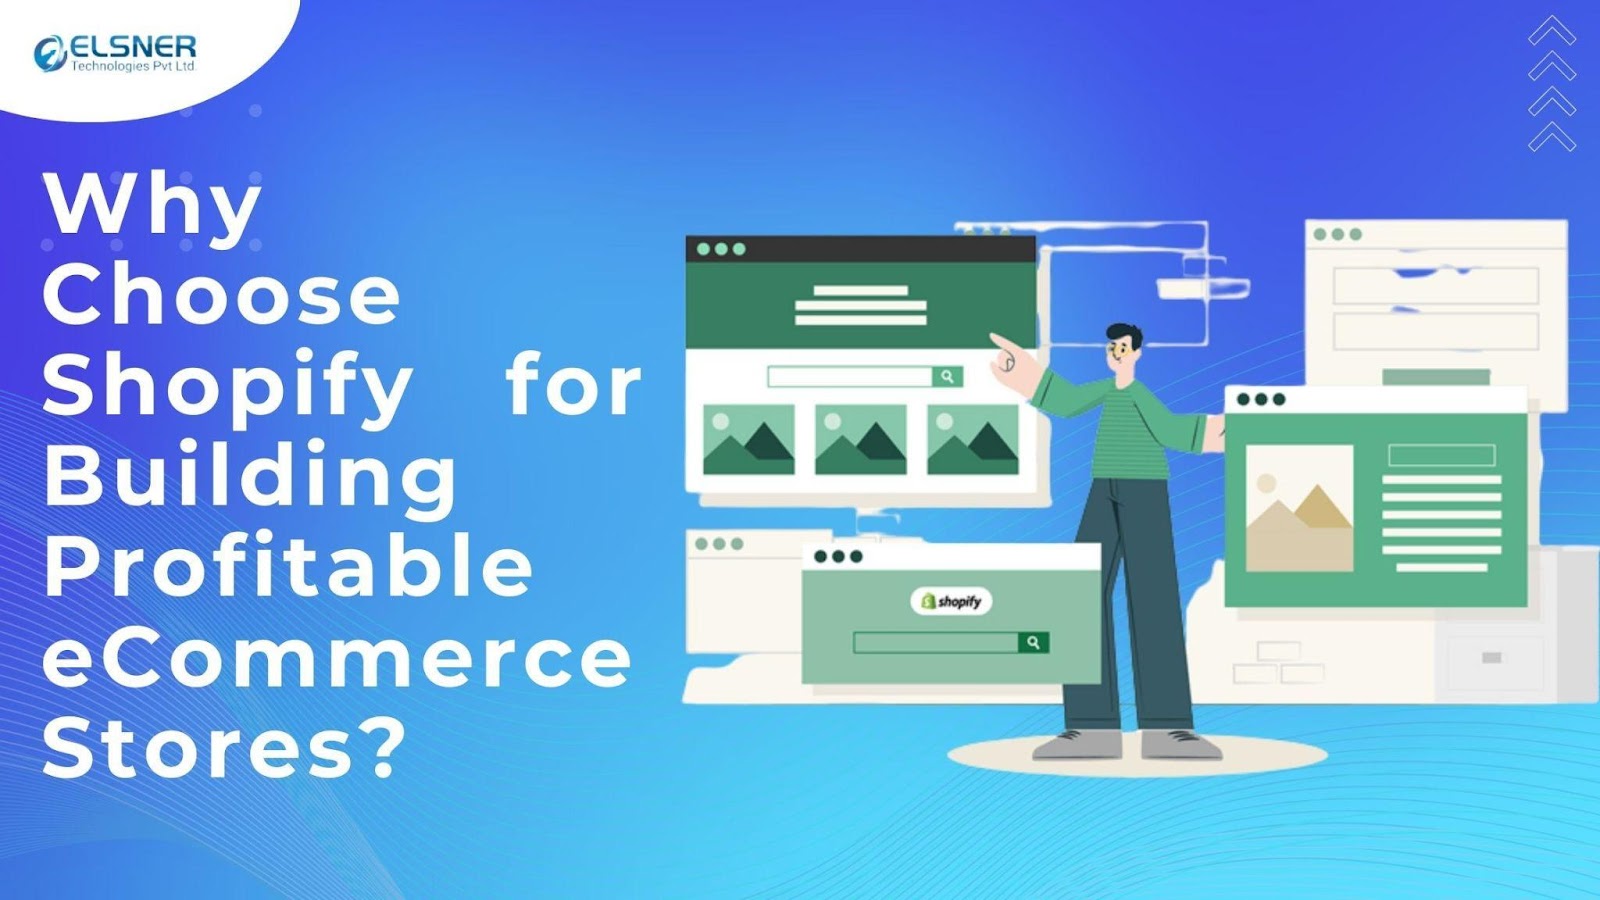 Shopify for Building Profitable eCommerce Stores